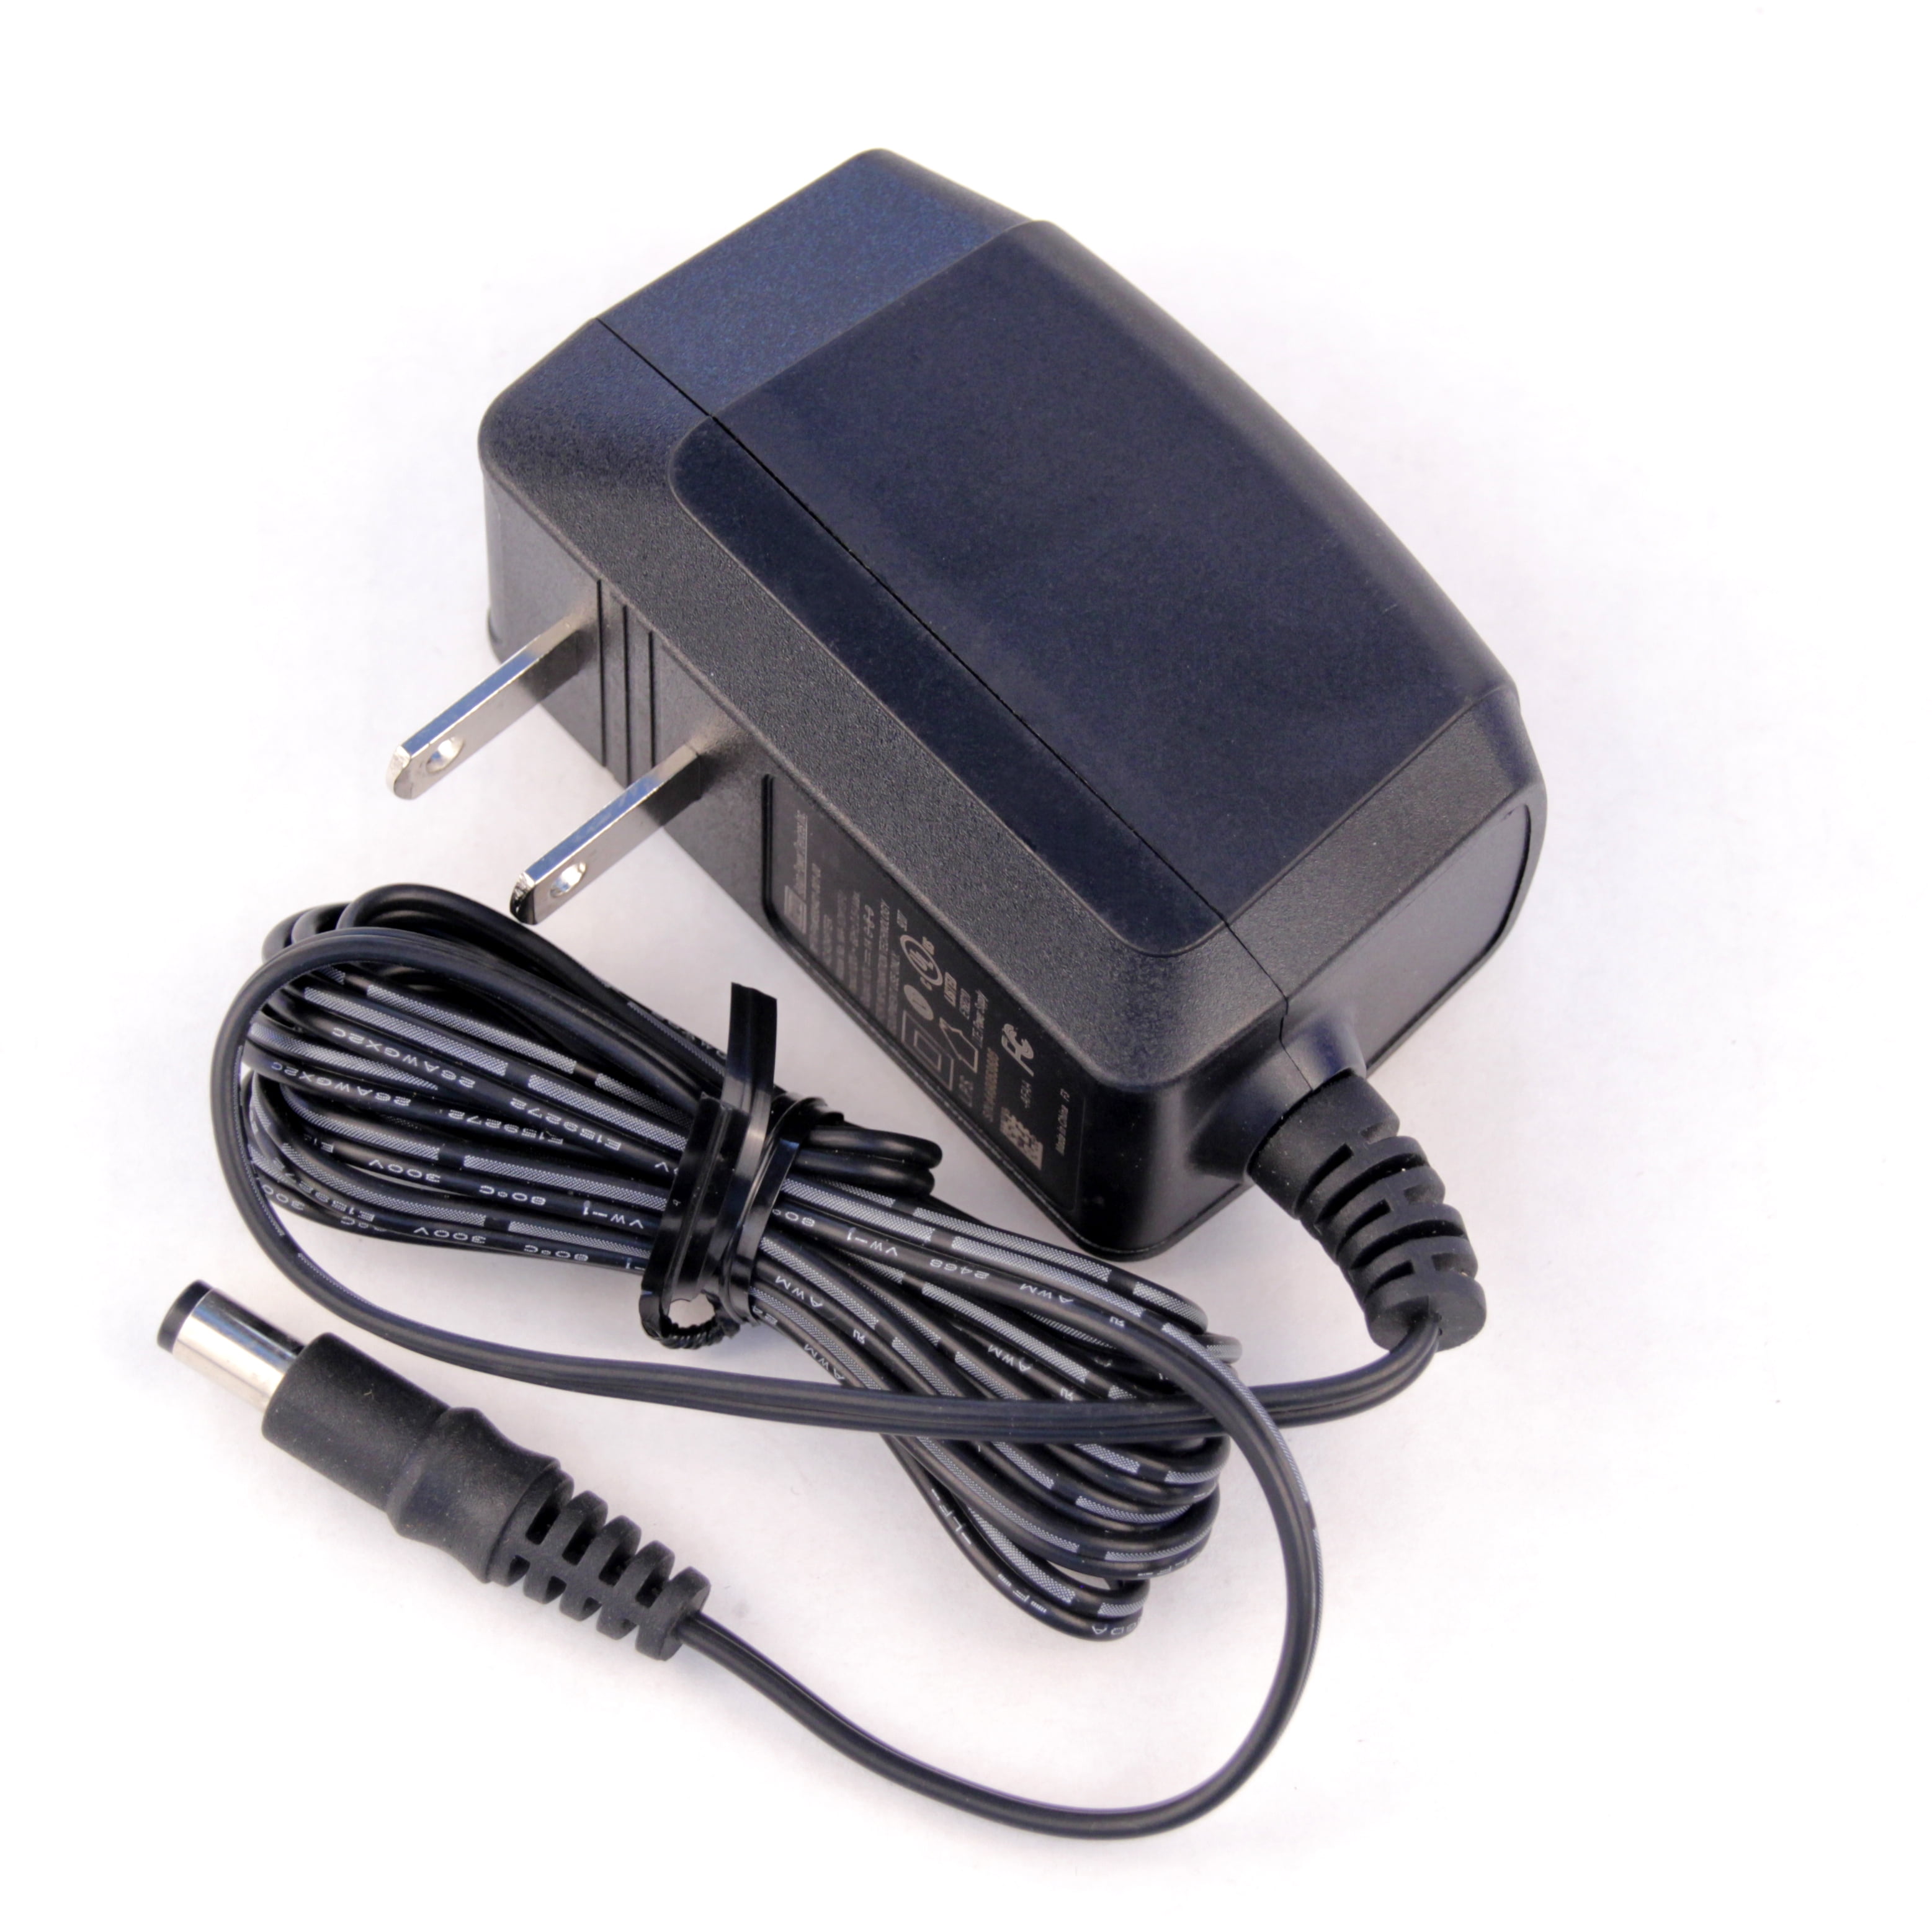 12 Power Supply - 1 Amp Standard (12V 1A DC) 12W Adapter Connector Size 5.5mm x 2.1mm - Walmart.com